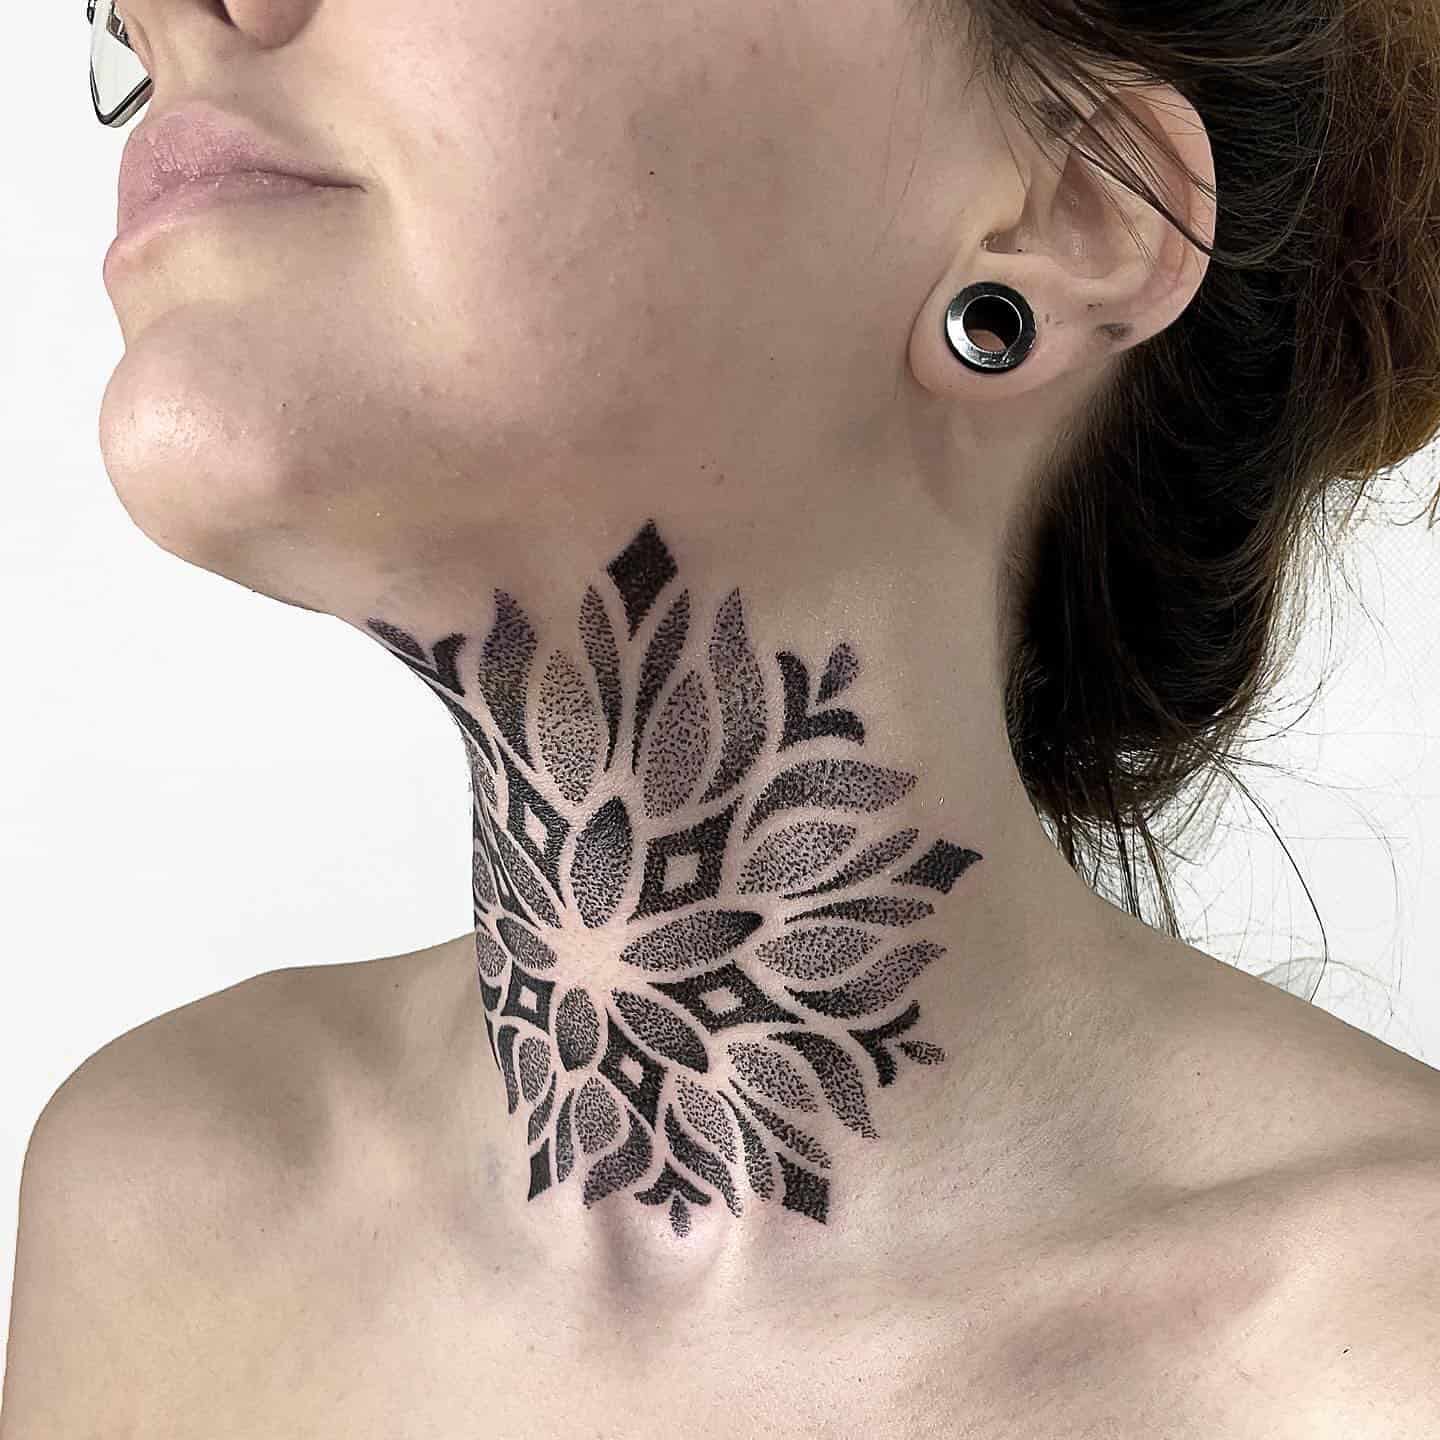 Tattoo Care For Sensitive Body Parts – Stories and Ink